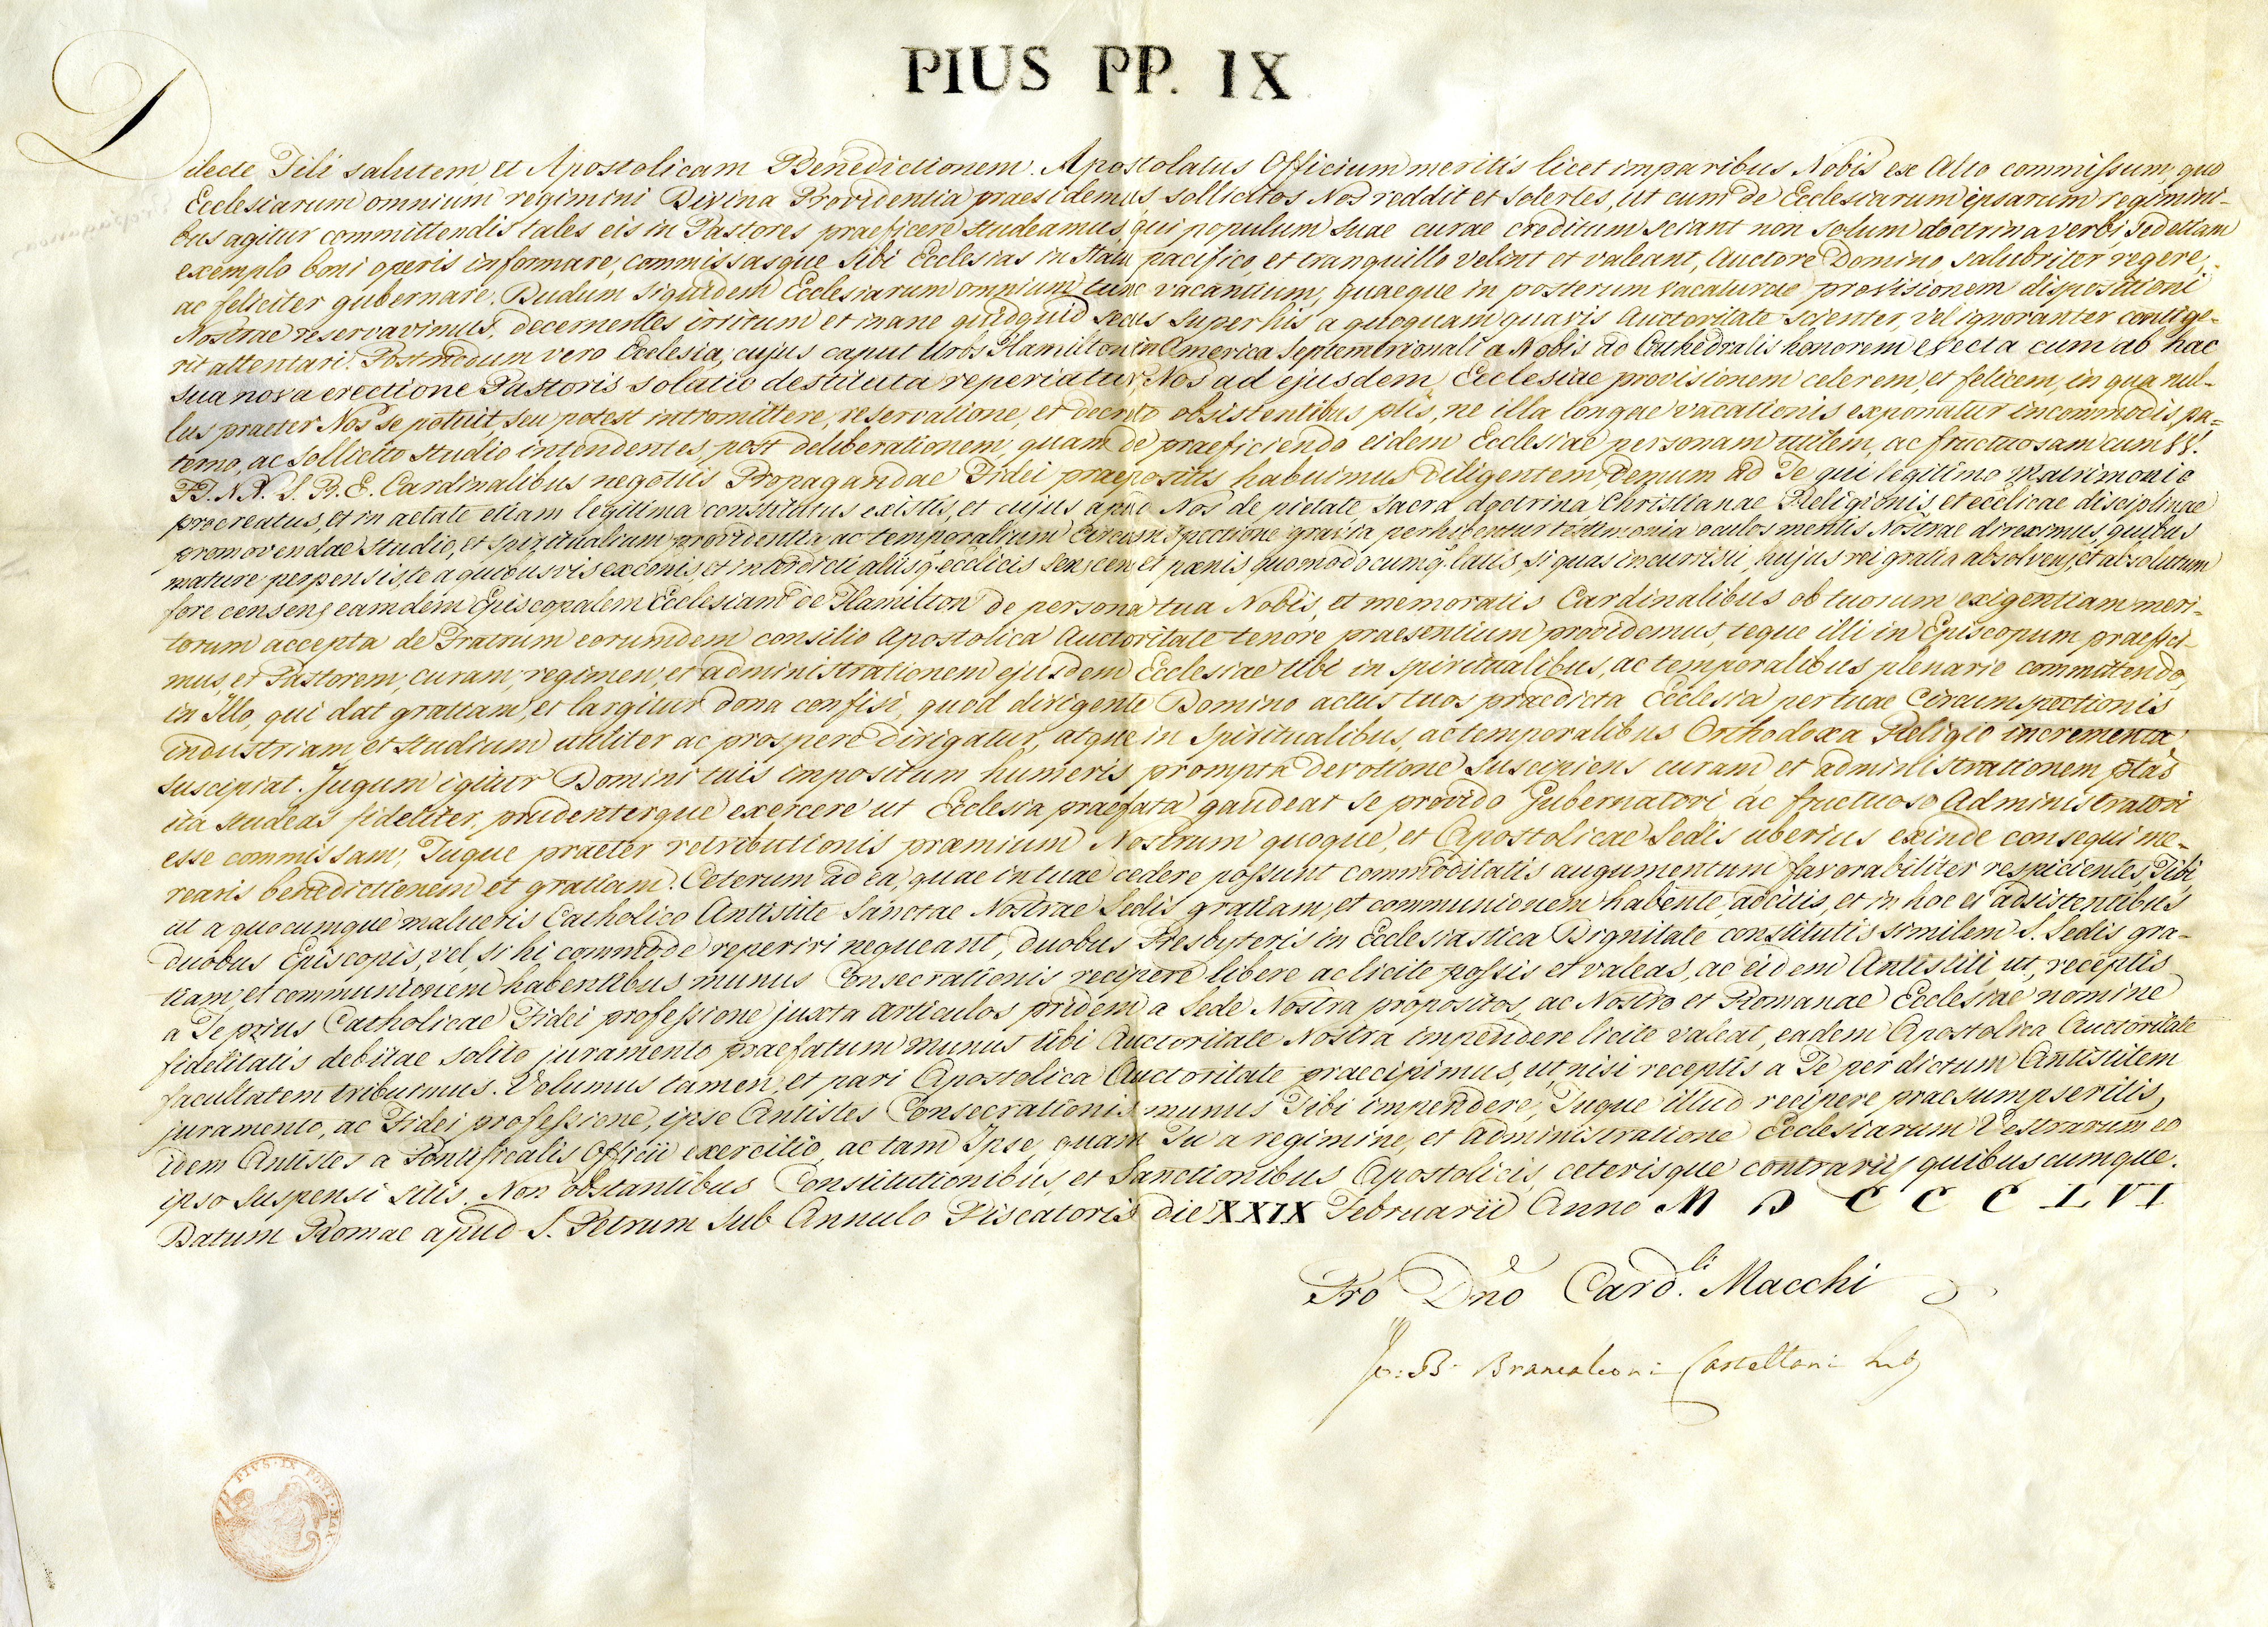 Photograph of the Papal Bull establishing Bishop John Farrell as the first Ordinary of the Diocese of Hamilton from 1856. This is a handwritten document written in cursive and including the seal of Pope Pius IX.